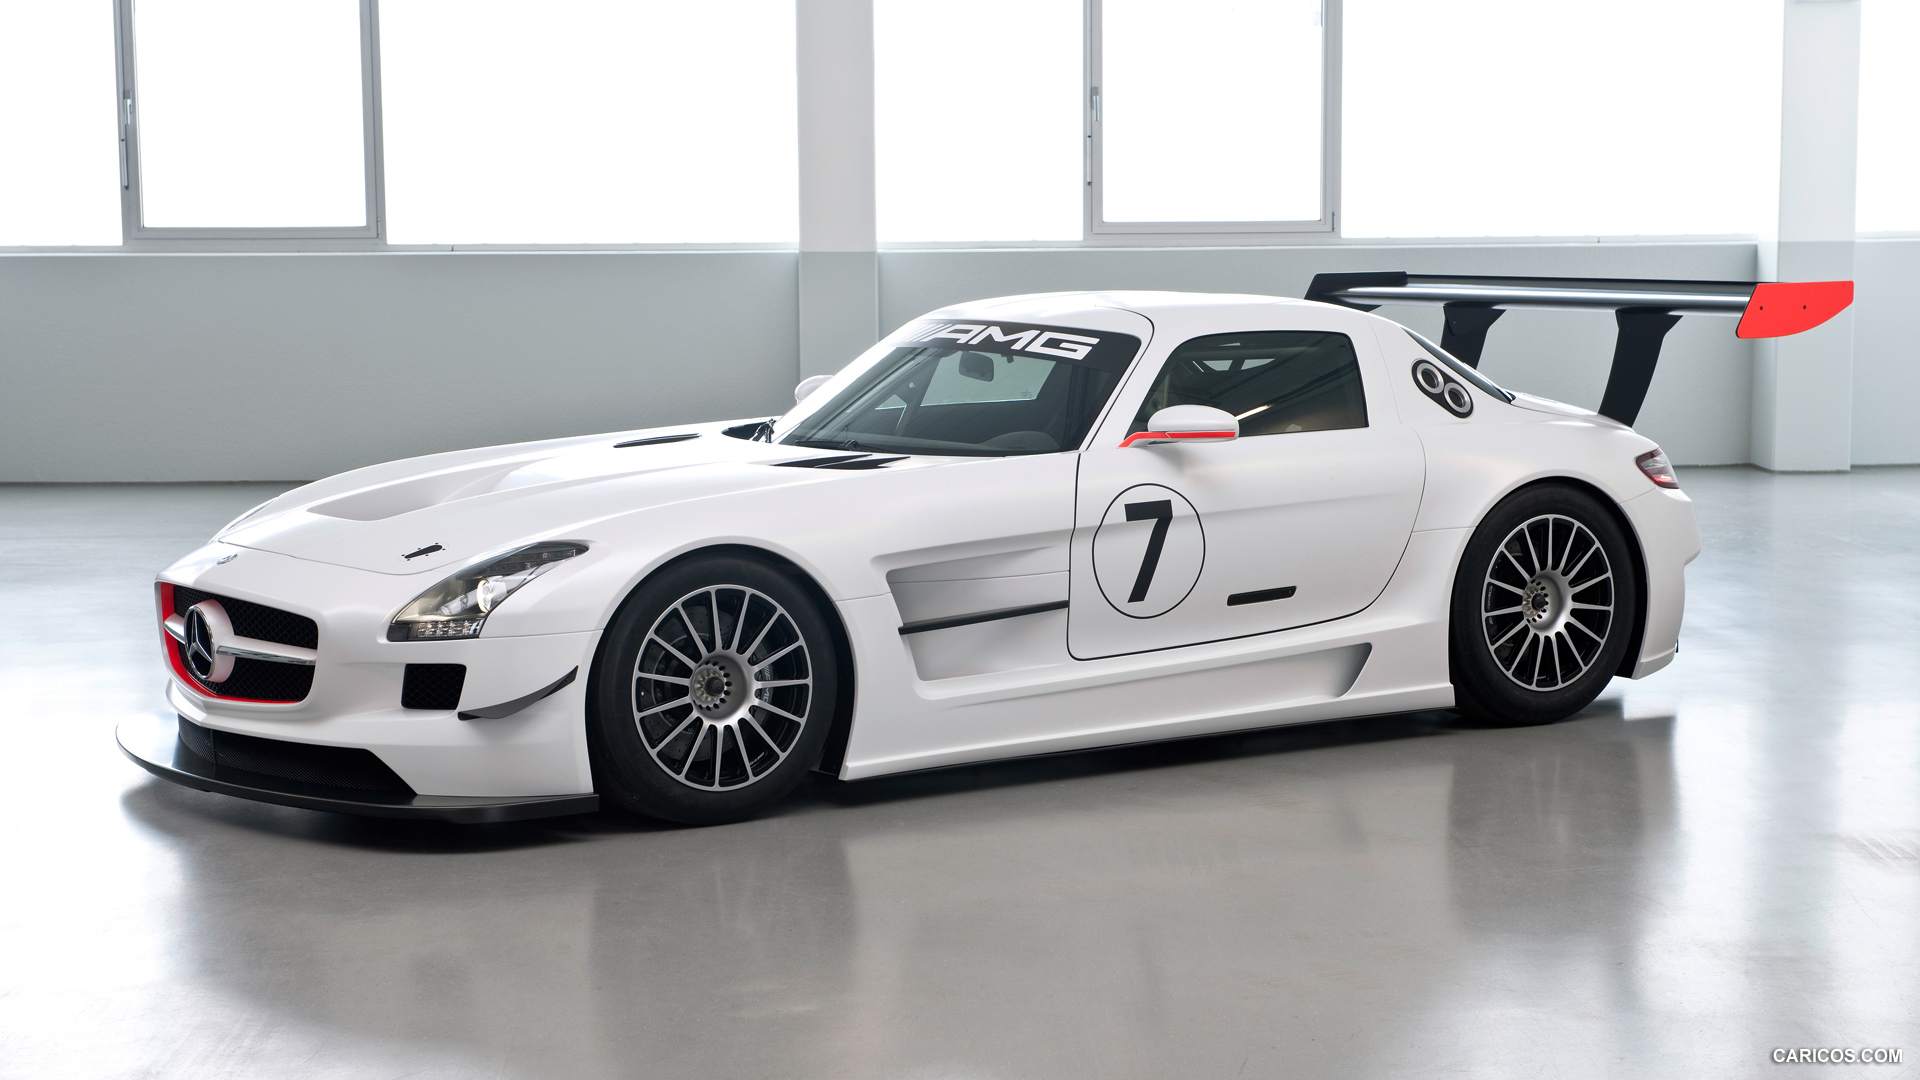 Mercedes-Benz SLS AMG GT3  - Side View Photo, #24 of 30